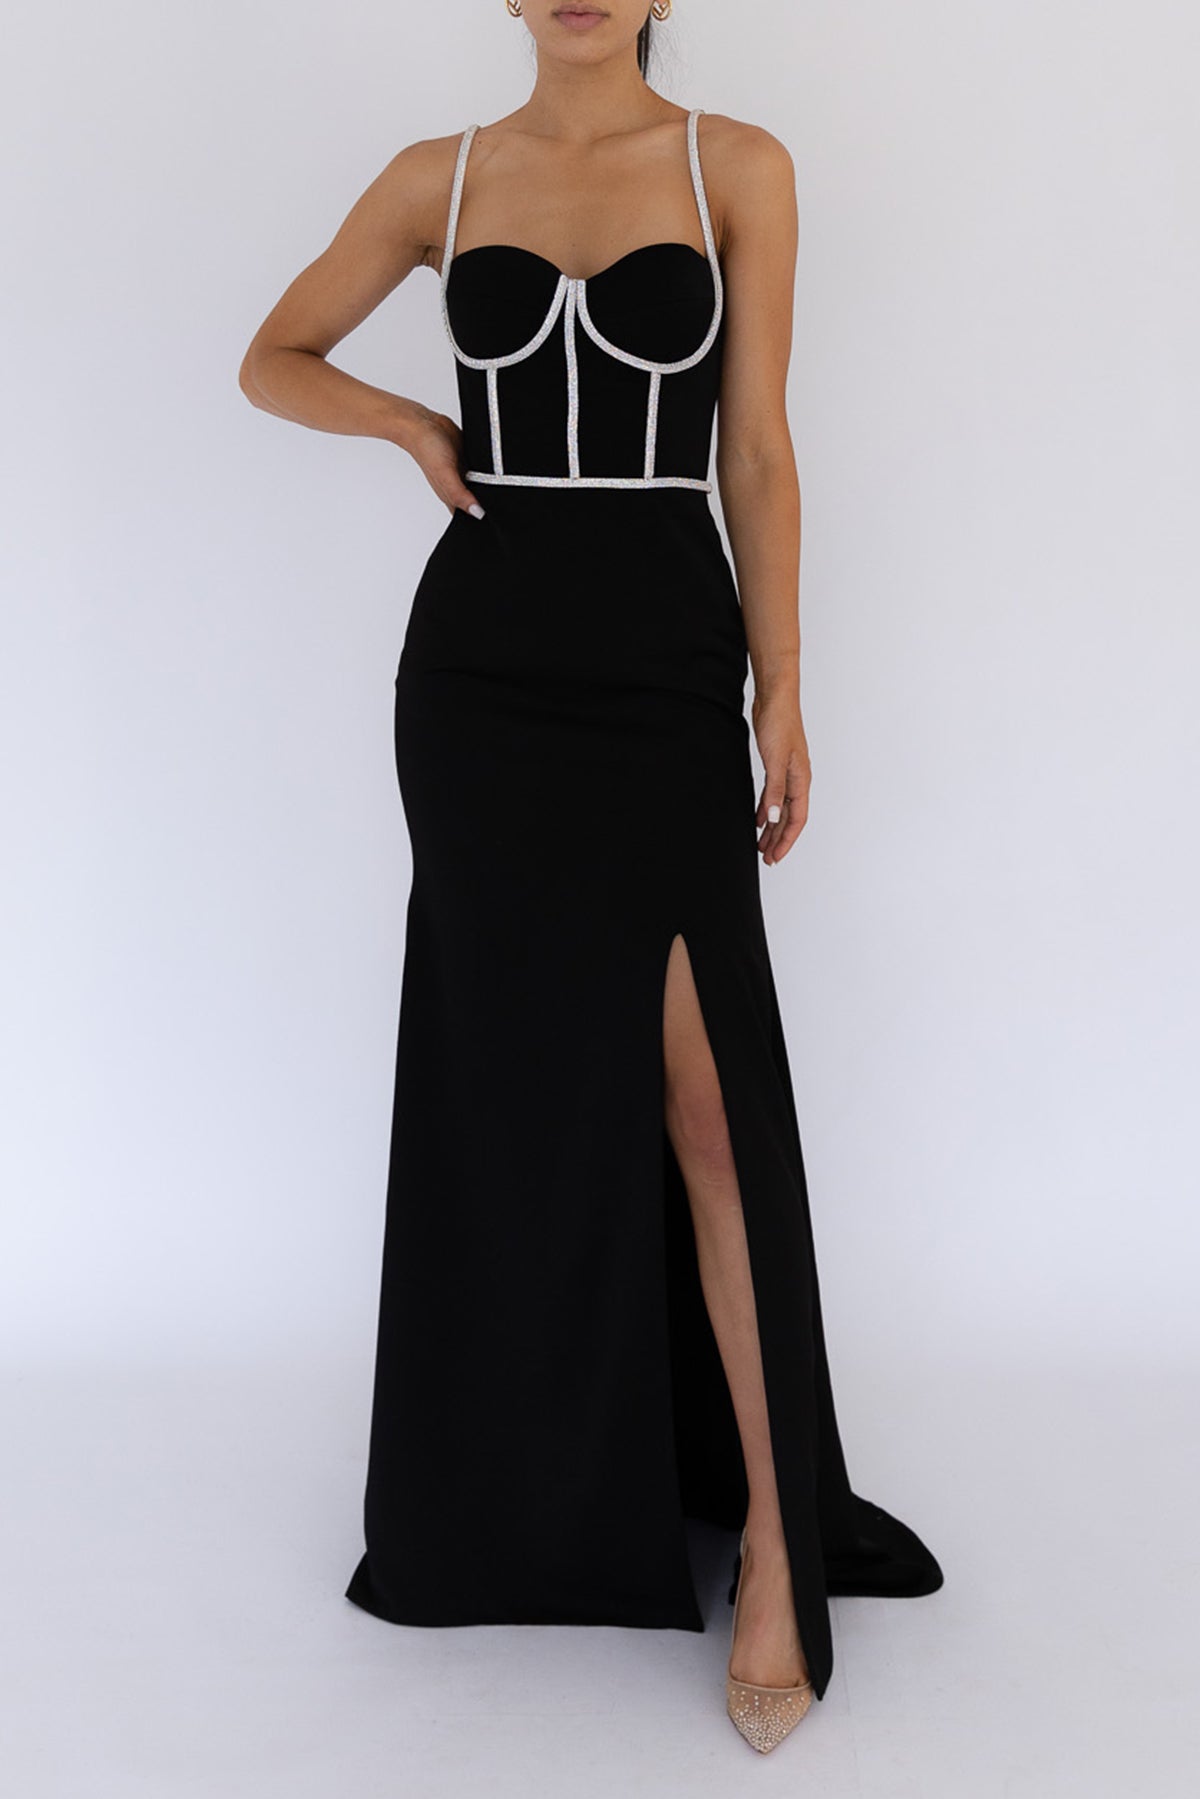 CRYSTAL Corset Gown - Black